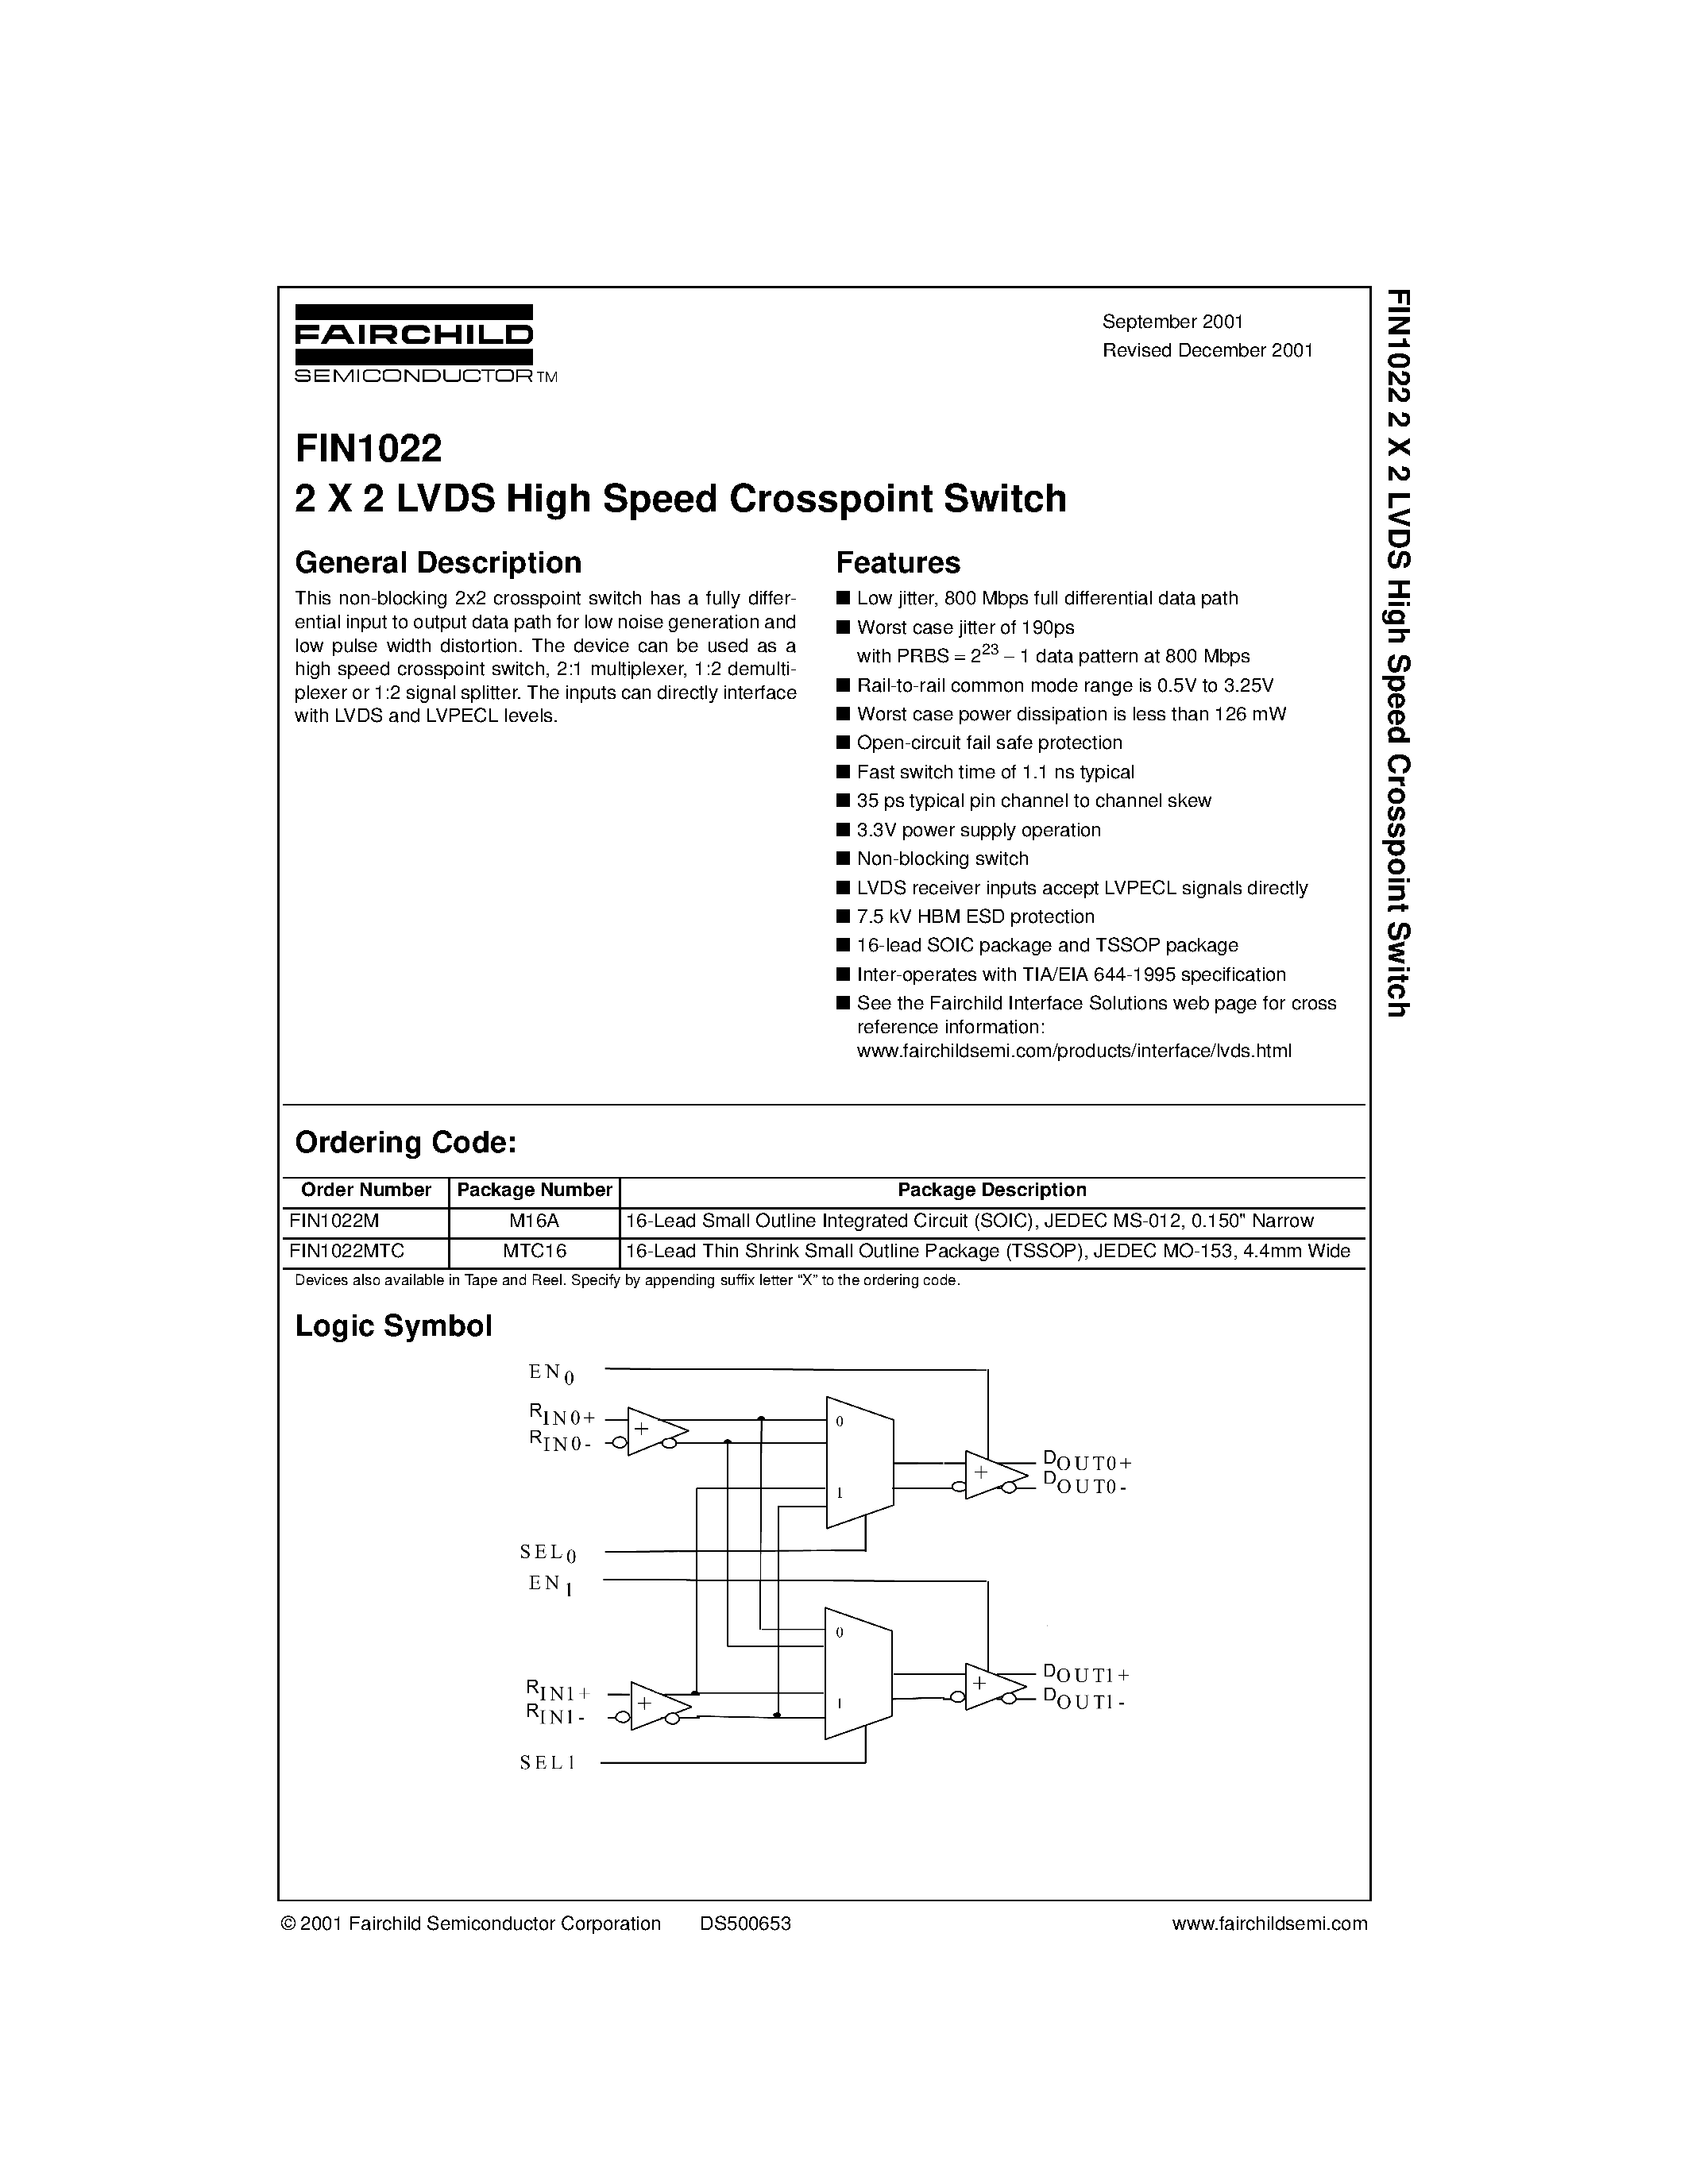 Datasheet FIN1022MTC - 2 X 2 LVDS High Speed Crosspoint Switch page 1